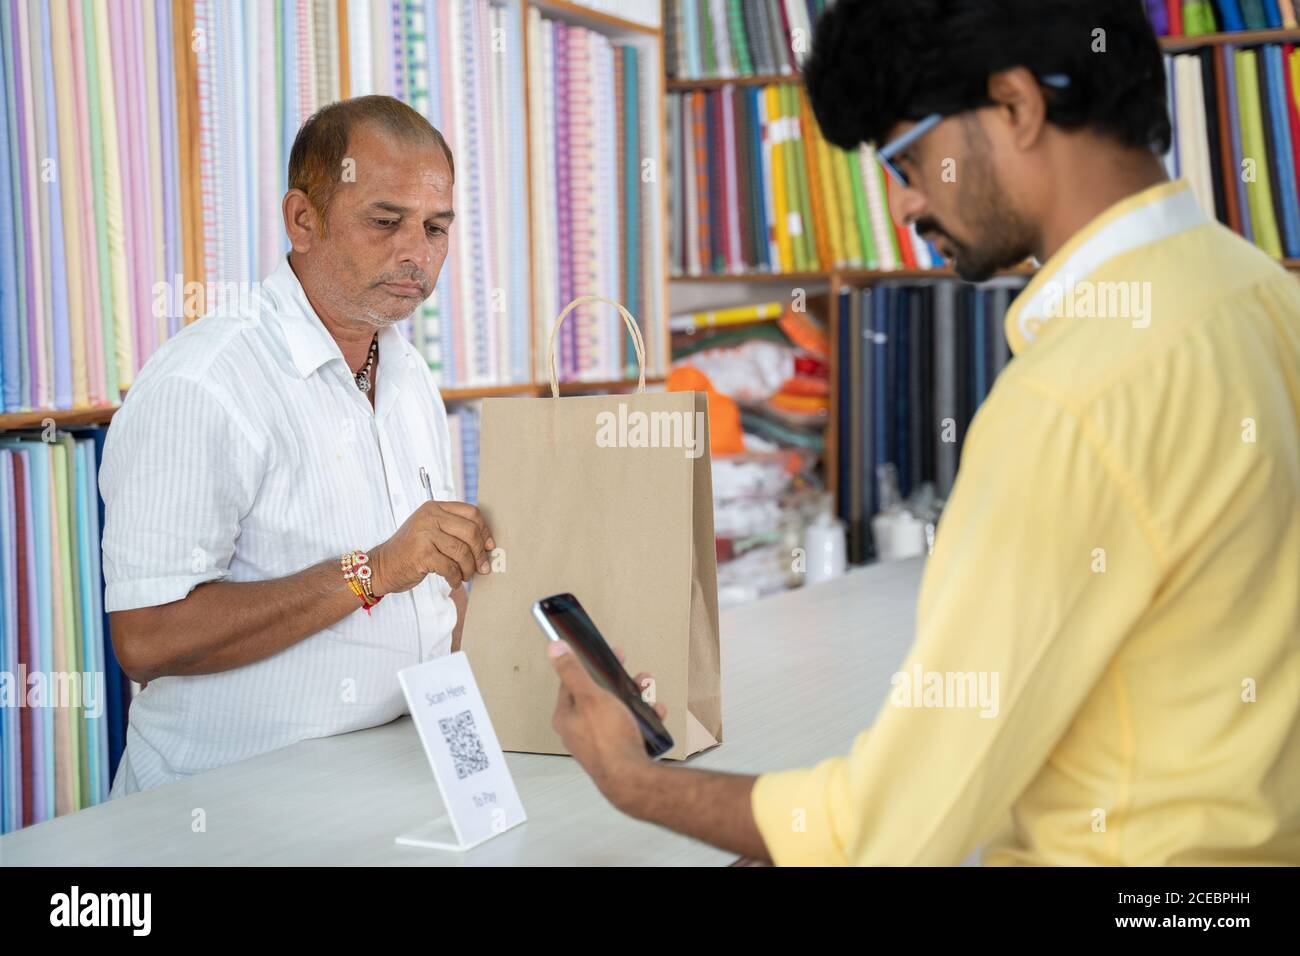 Customer using digital payment method scan to pay at cloth store to send money - concept of digital or contactless payment, e-transfer, technology and Stock Photo